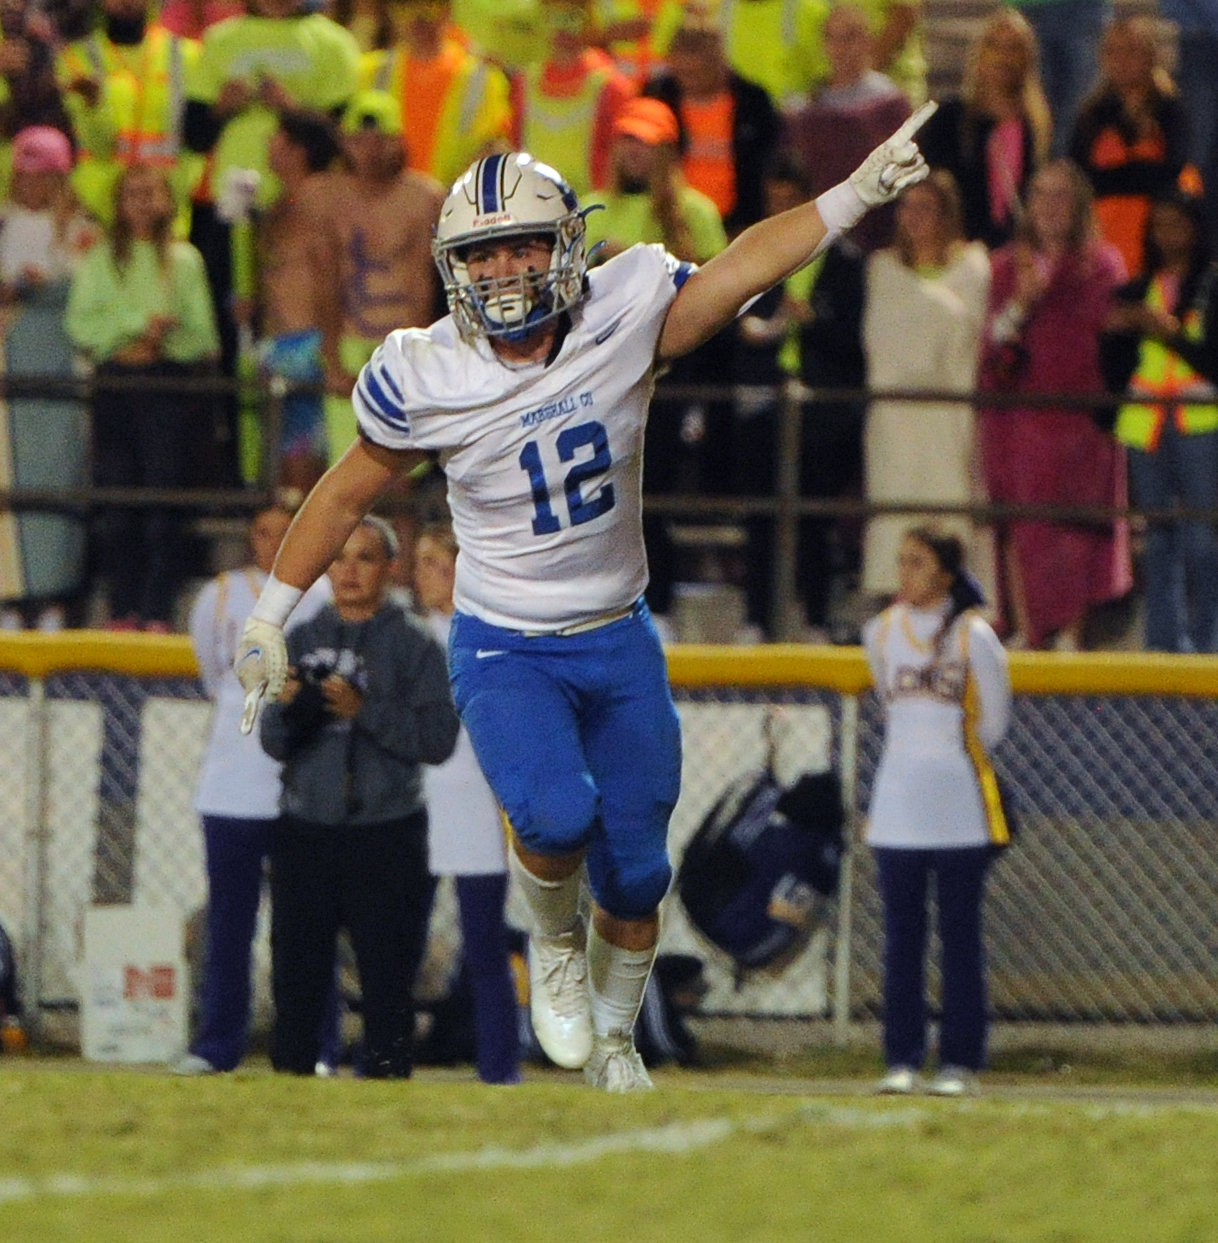 Trey Warner celebrates after the Tigers recovered a fumble against Lawrence County.